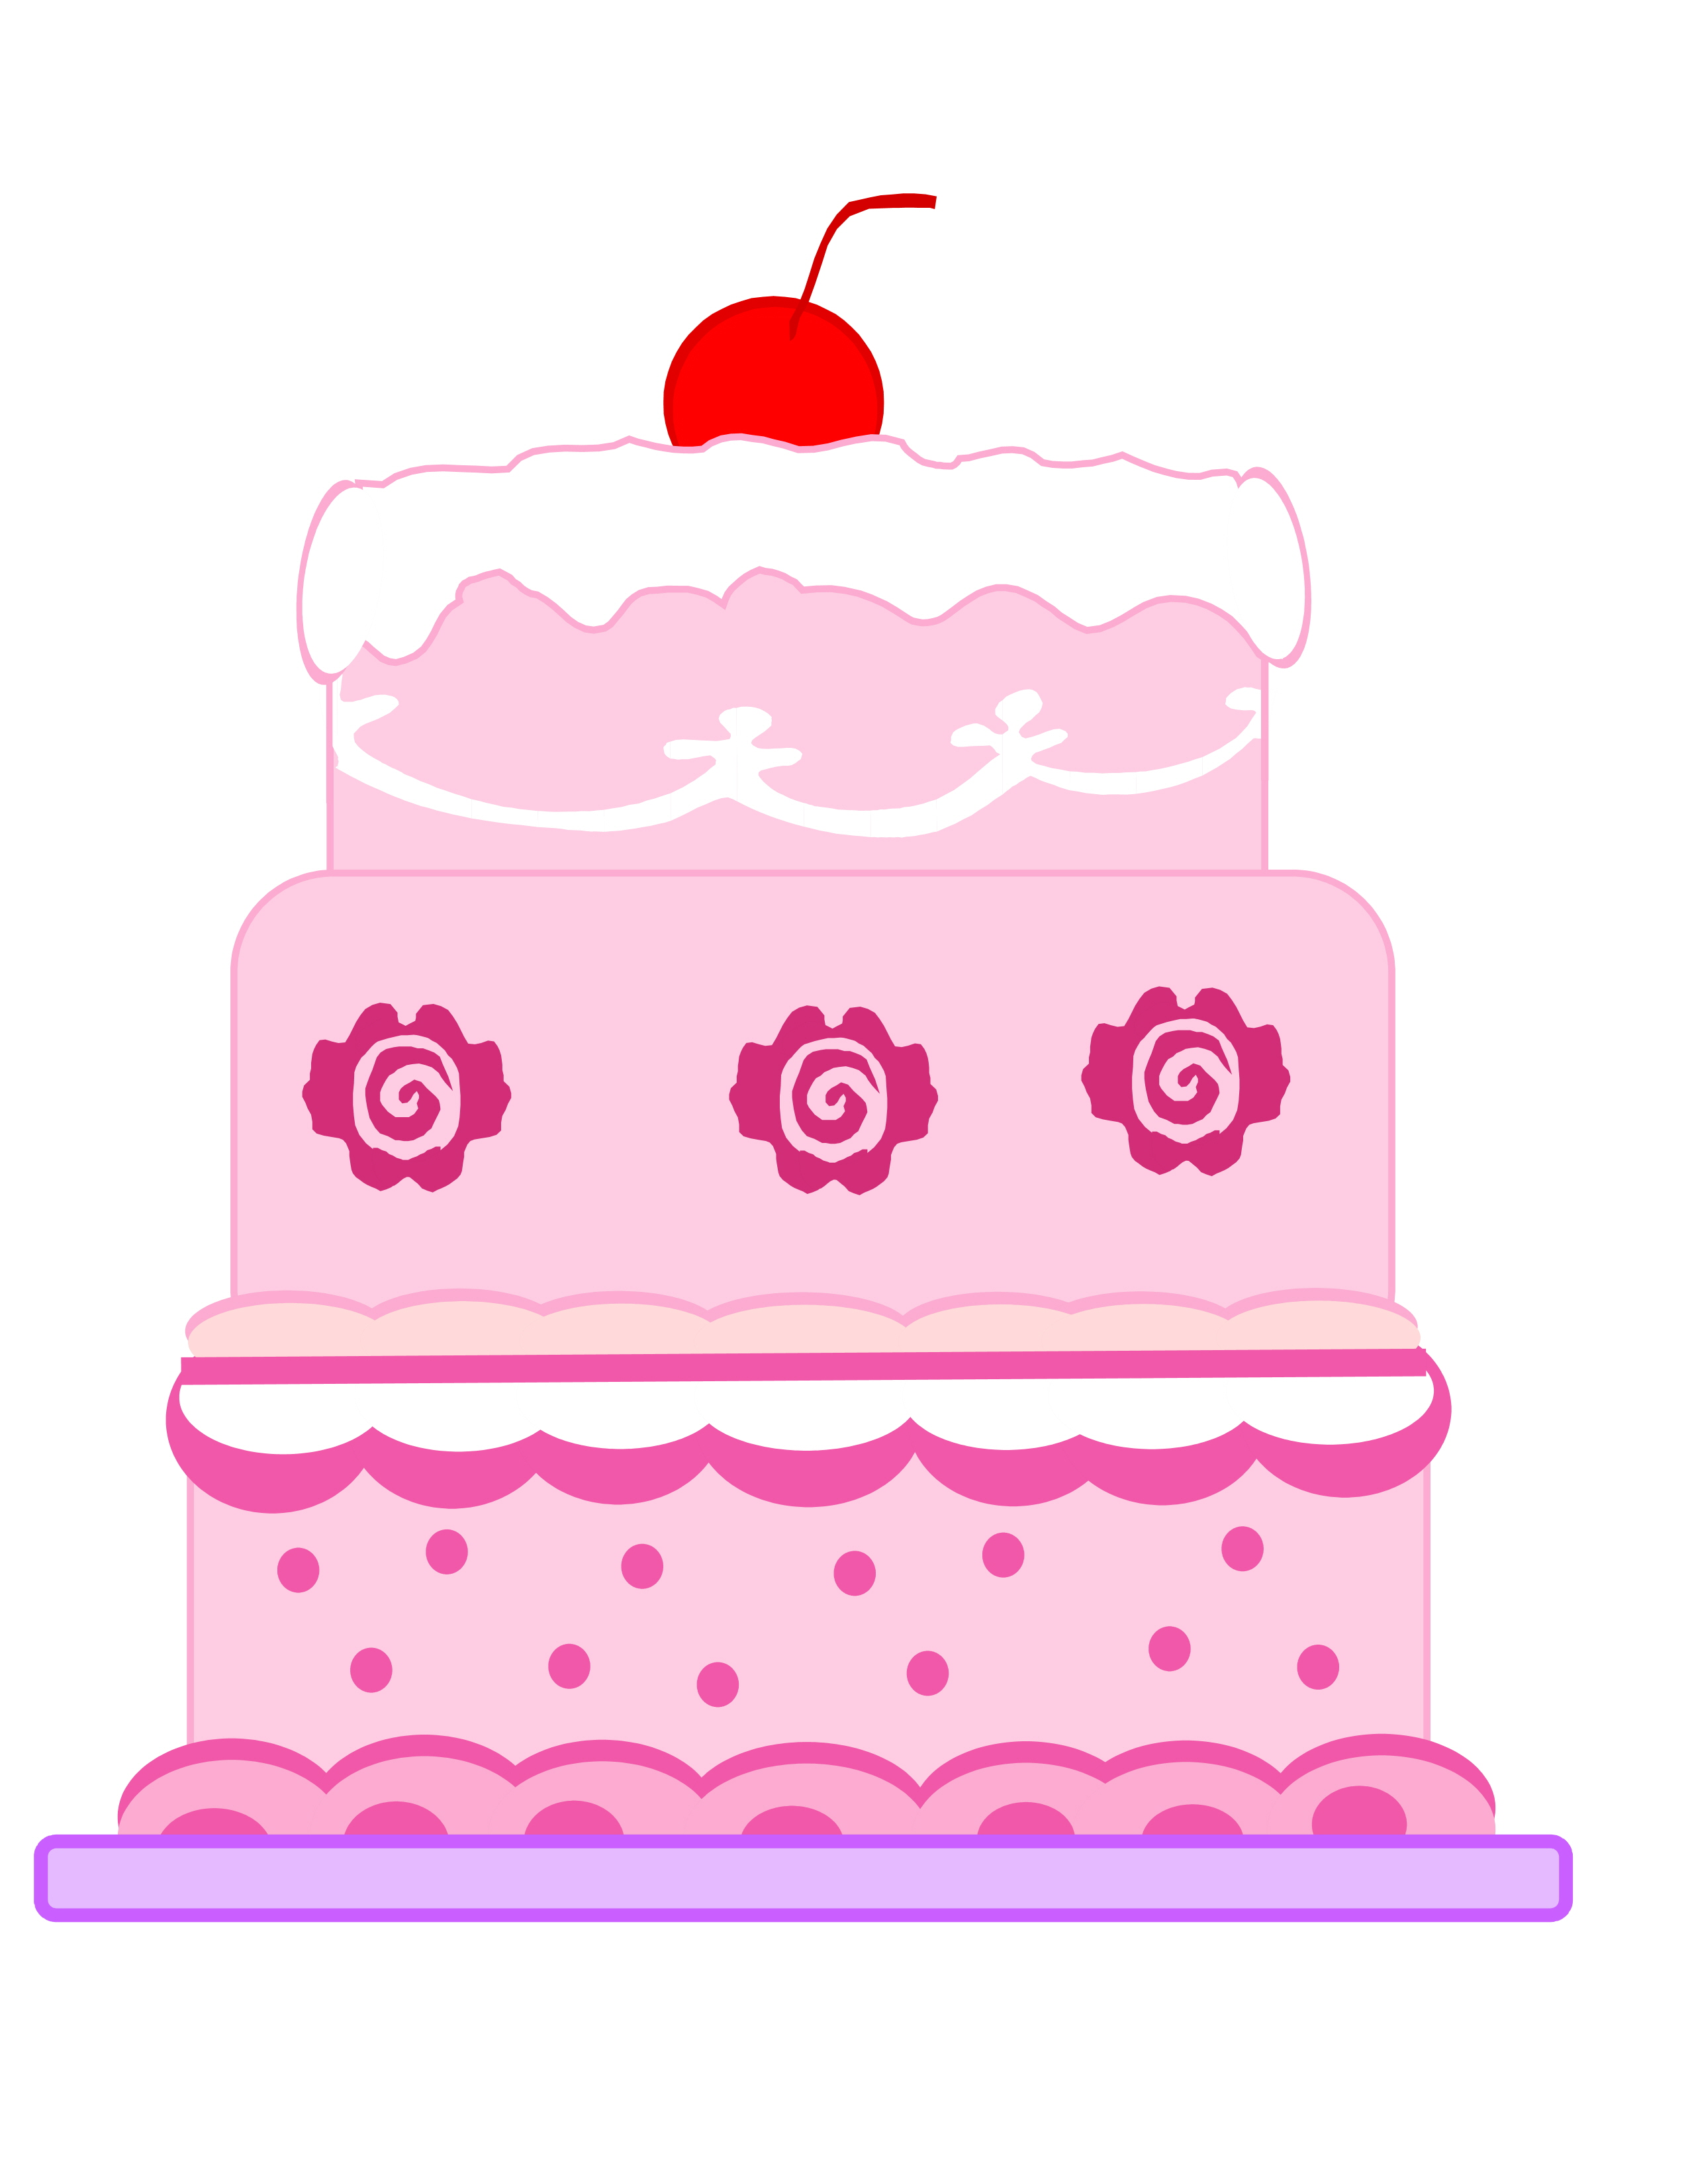 Cake   Free Images At Clker Com   Vector Clip Art Online Royalty Free